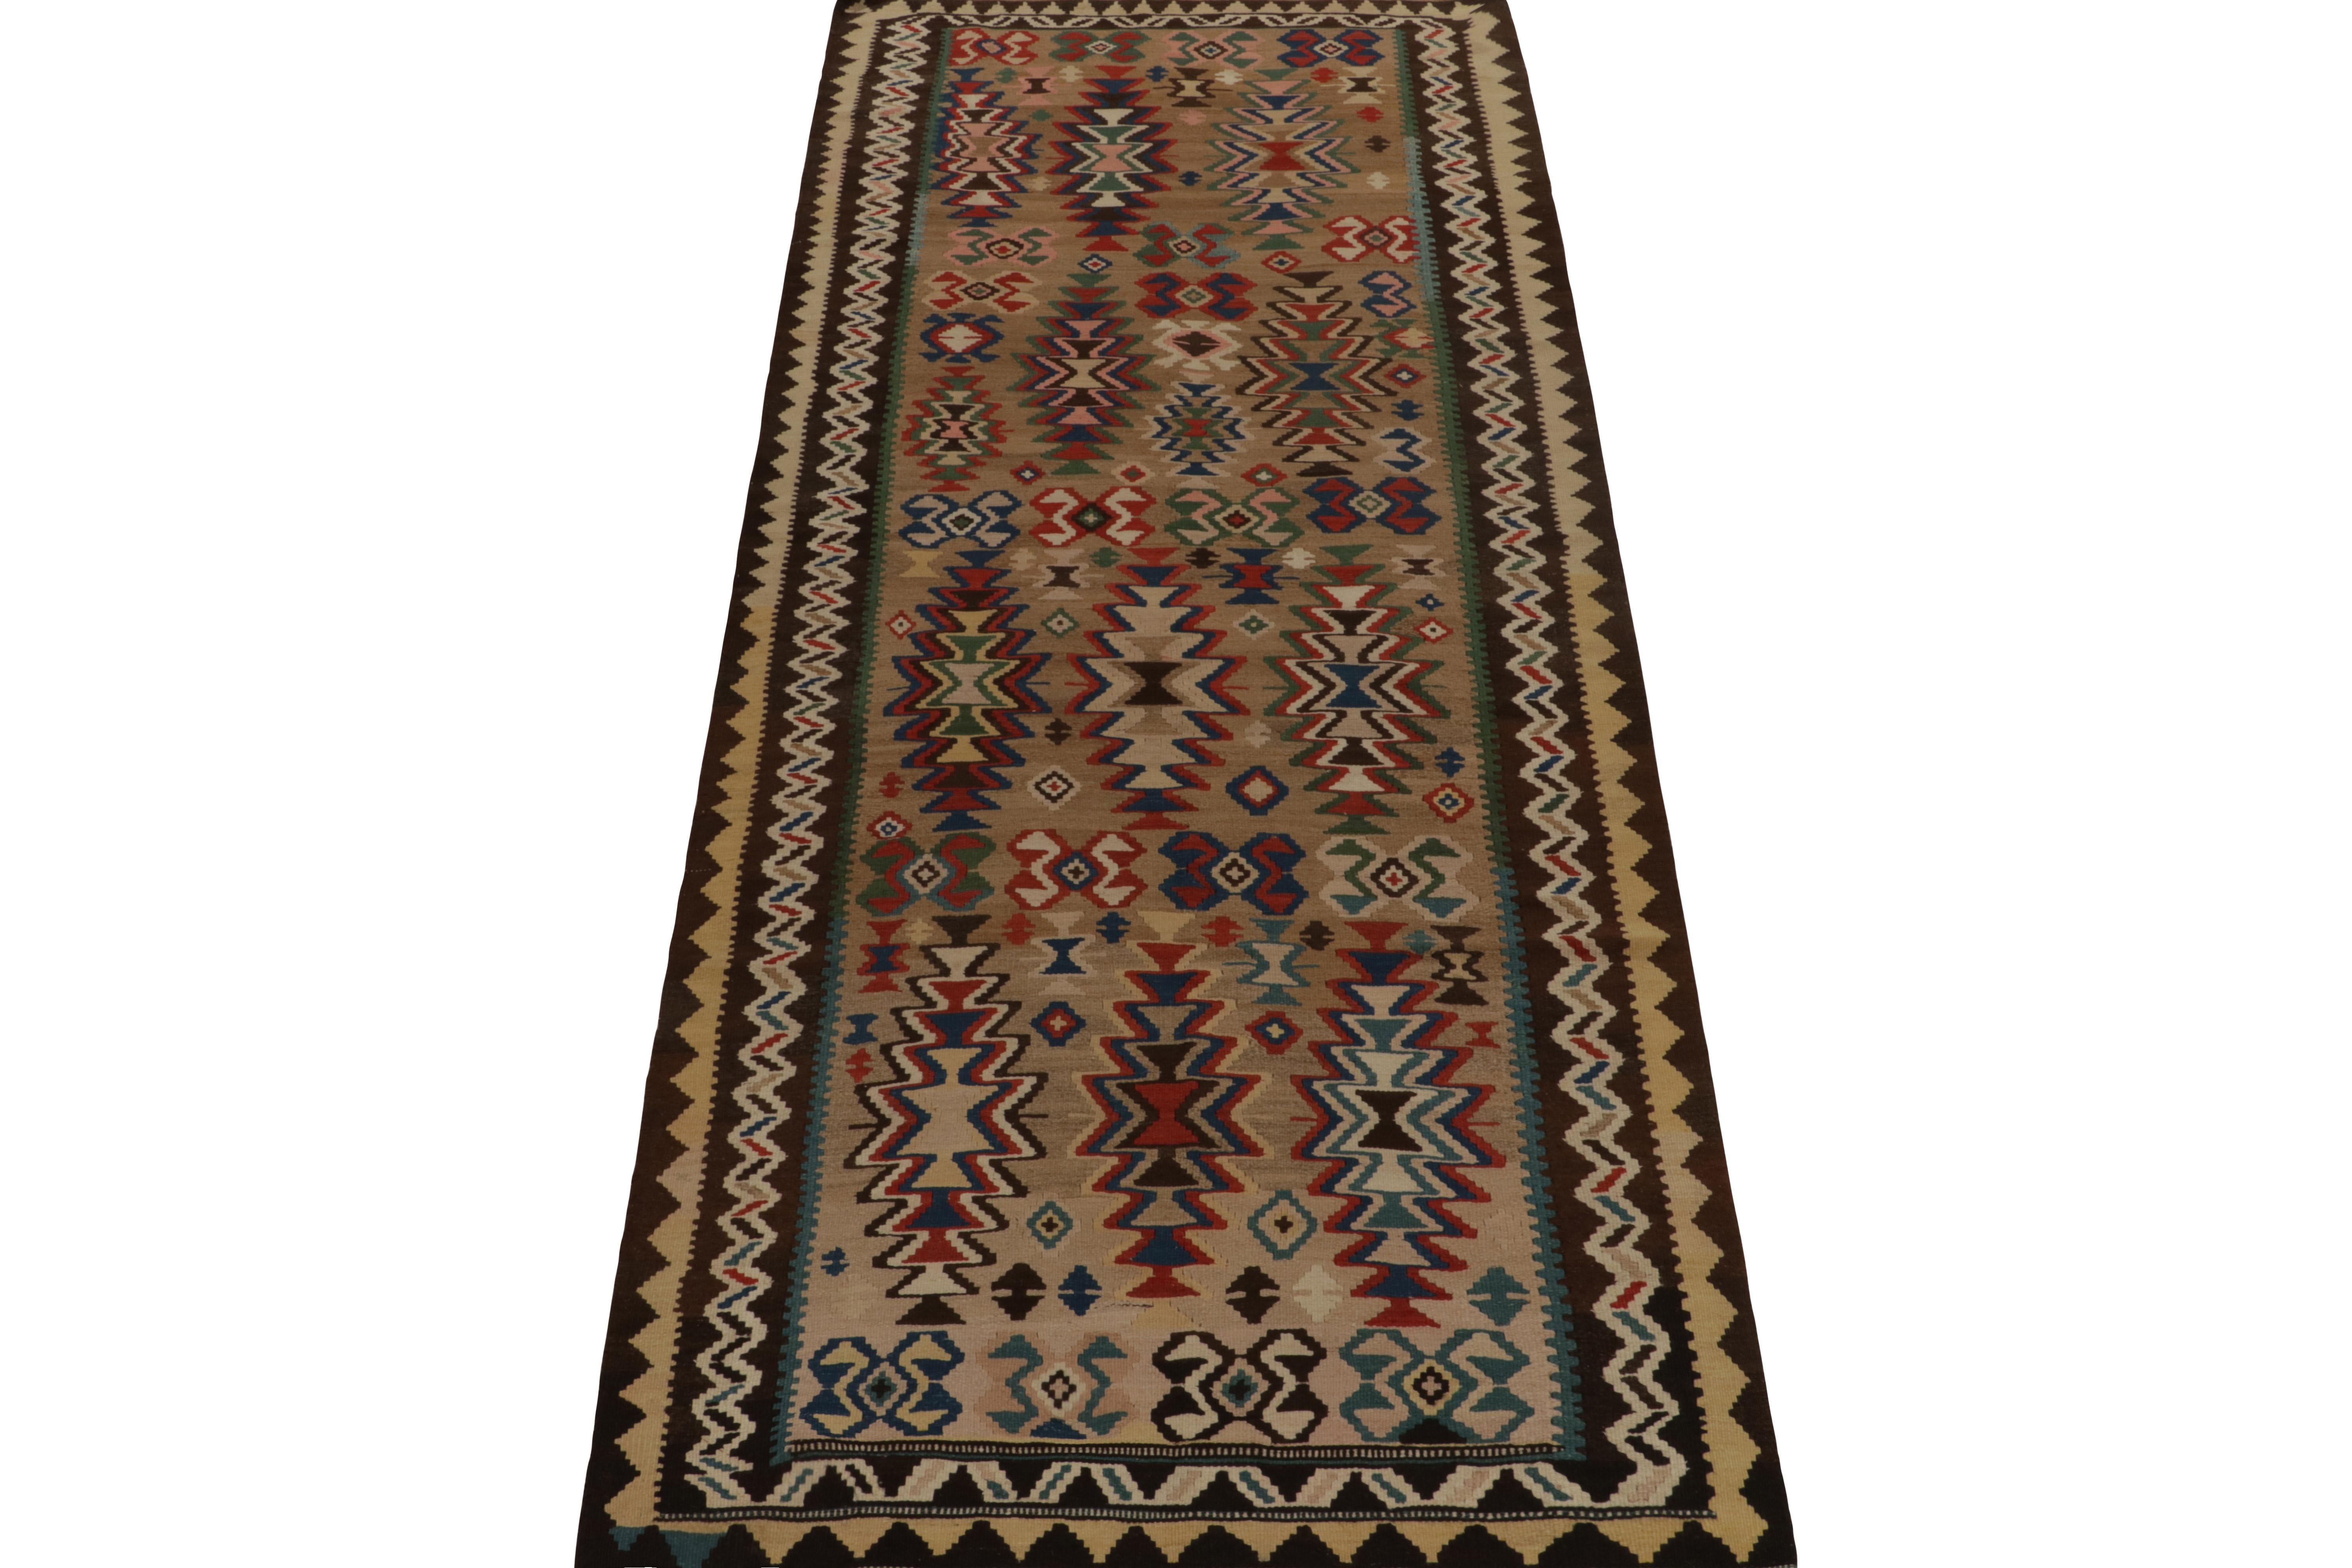 Handwoven in wool, this antique Kilim is the latest unveiled from R&K Principal Josh Nazmiyal’s coveted treasury of flat weave masterpieces. 

Originating circa 1920-1930, this particular Persian rug features a most unusual take on traditional